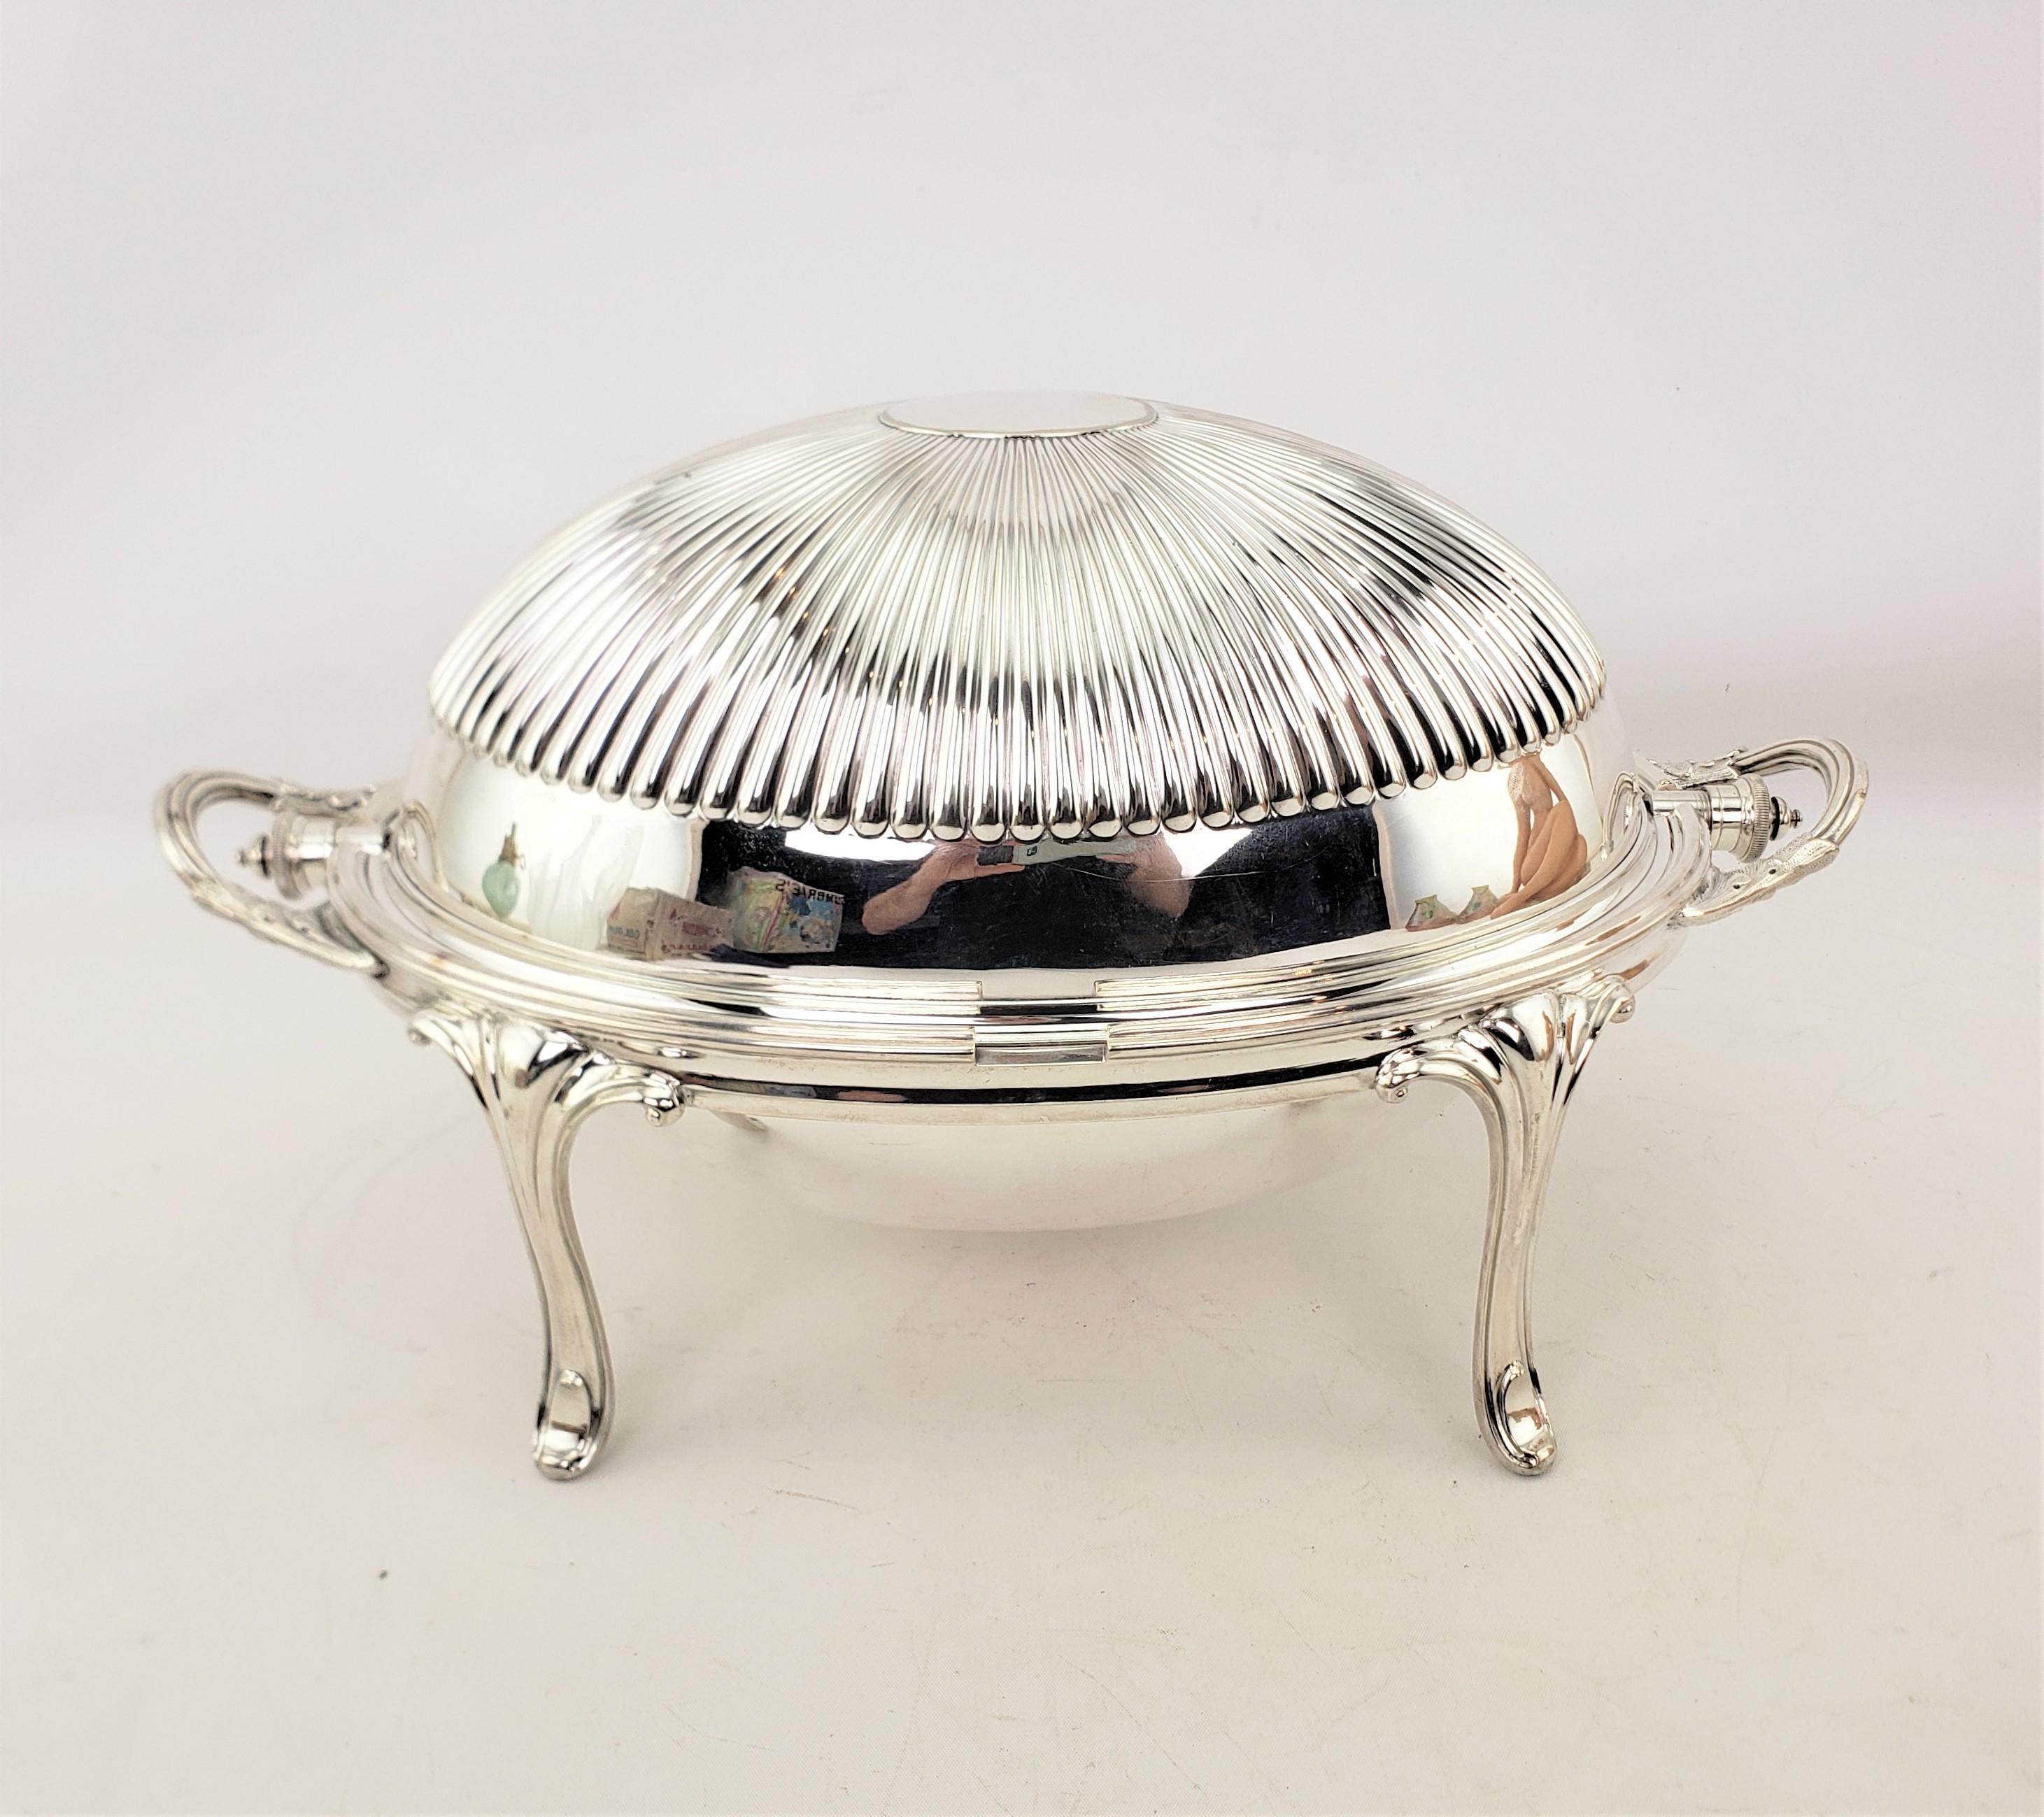 20th Century Antique English Silver Plated Domed Breakfast Warmer or Server